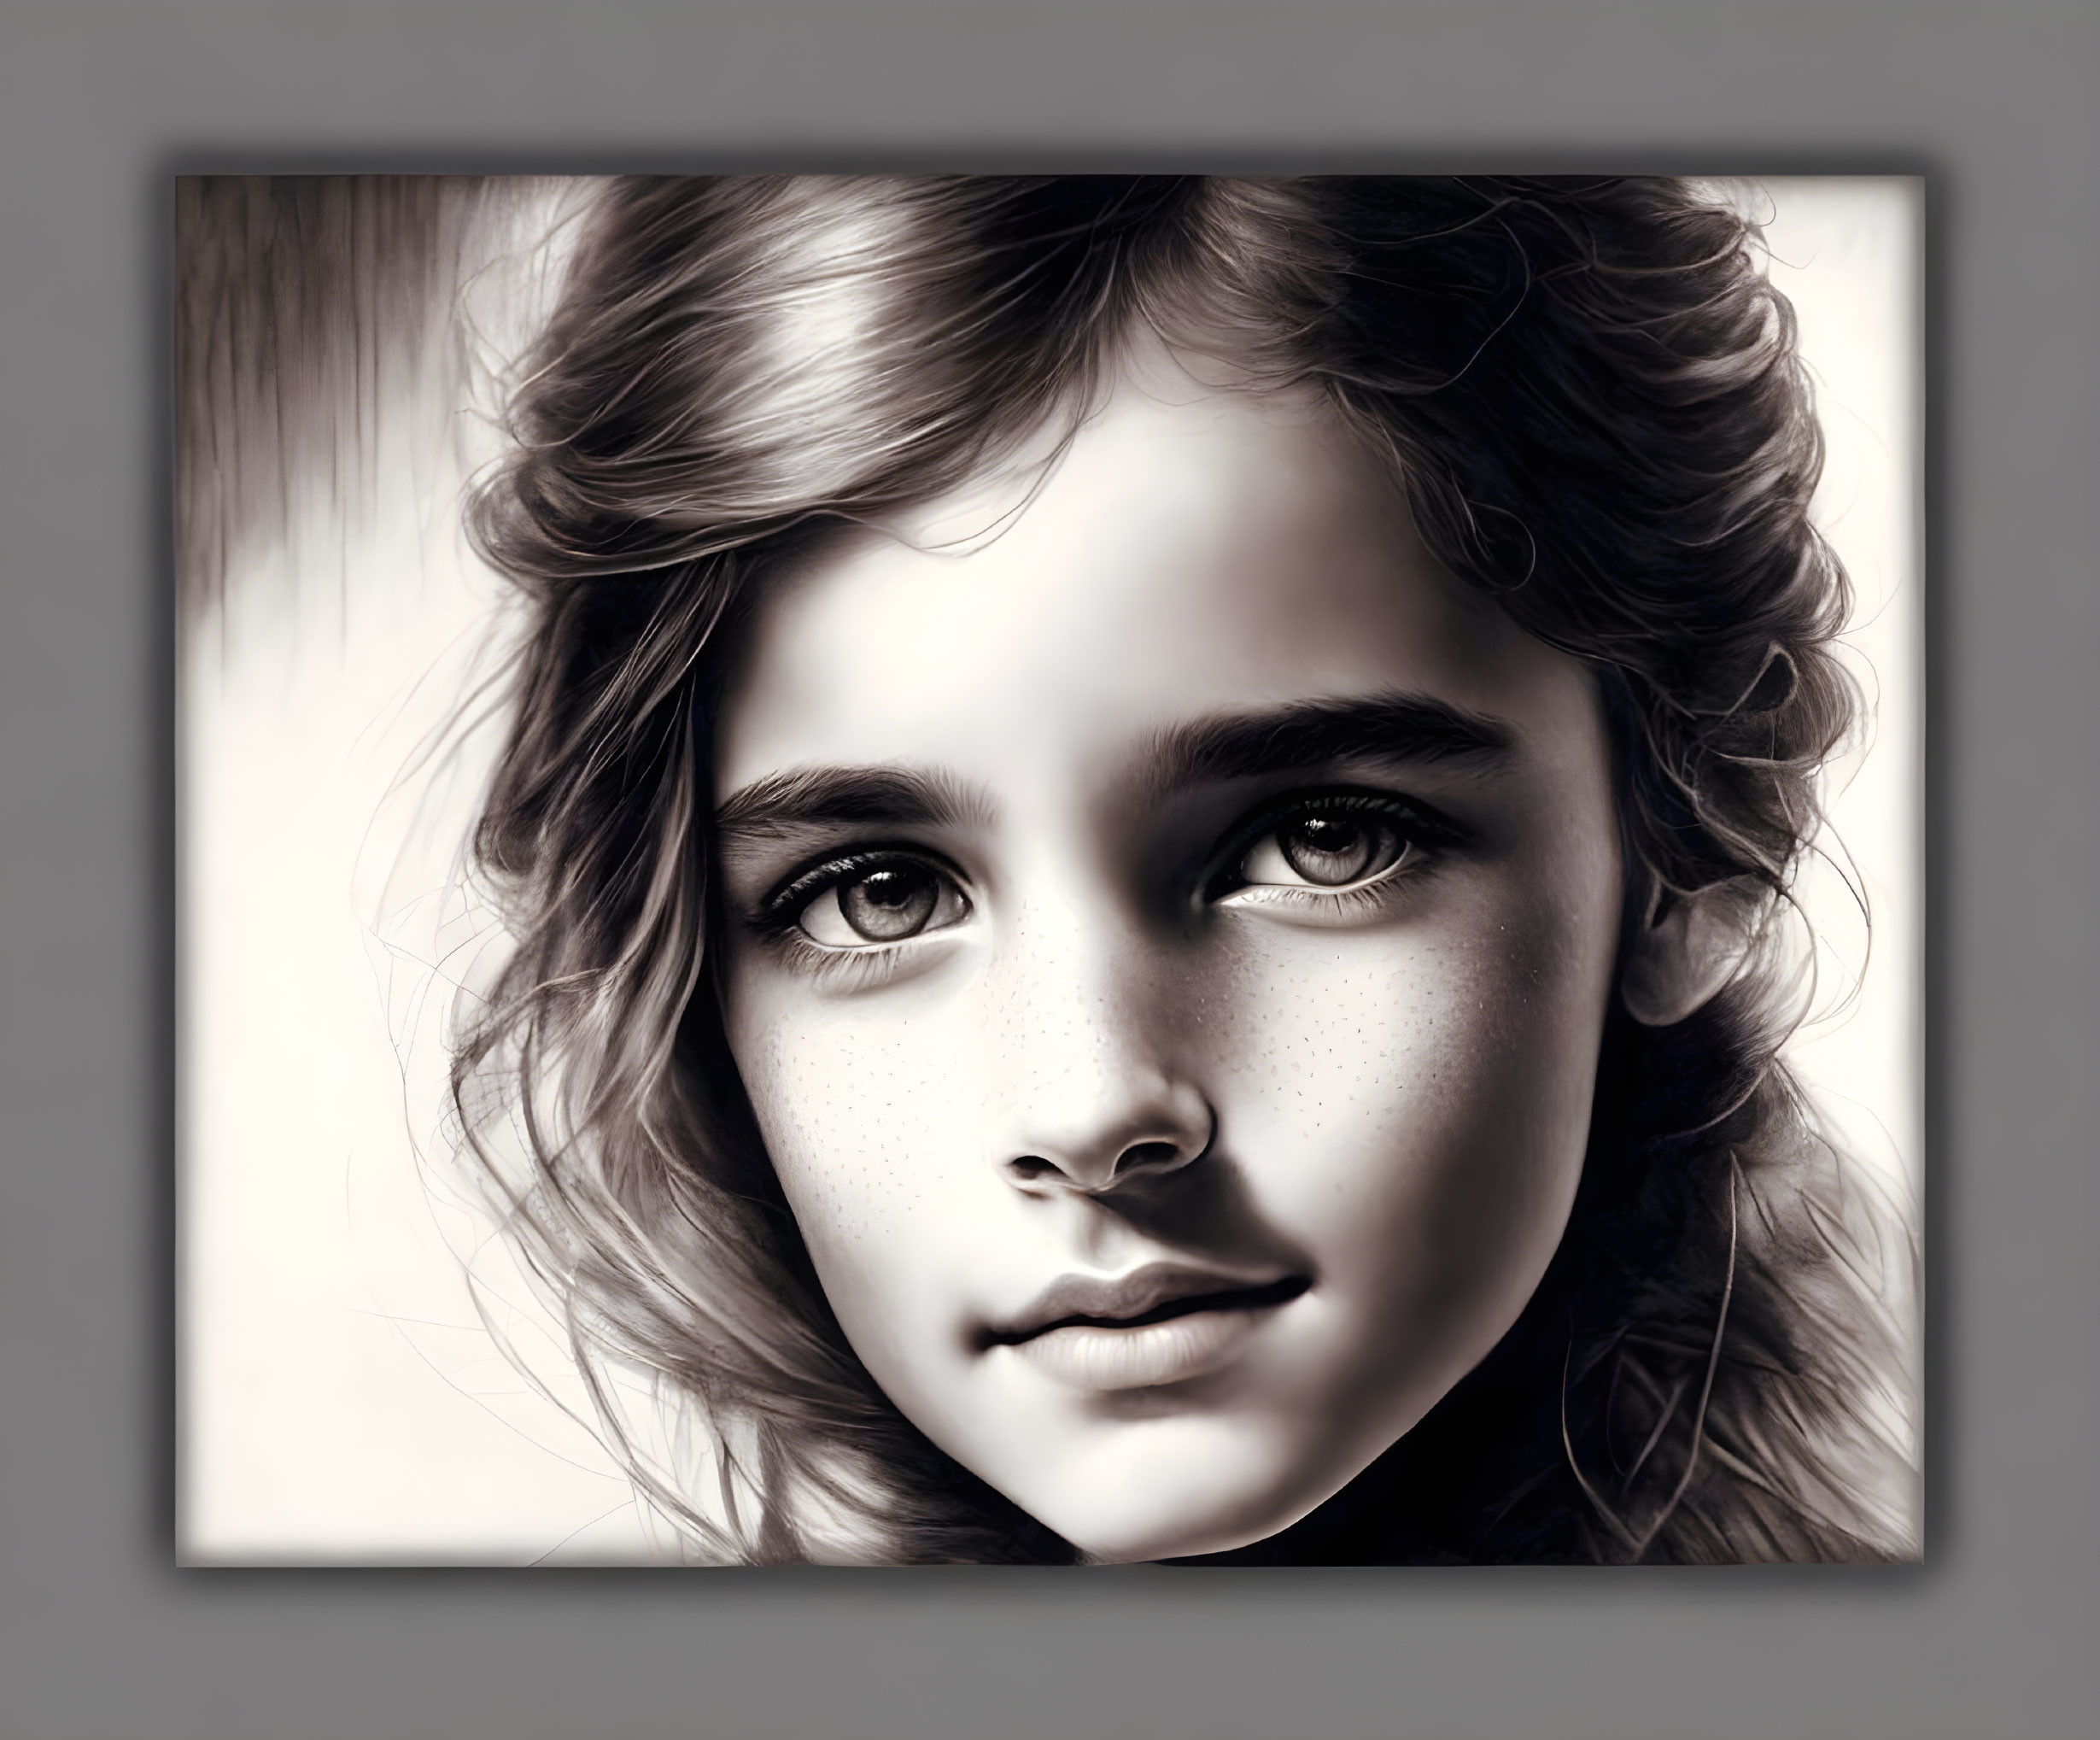 Beautiful portrait of a young girl